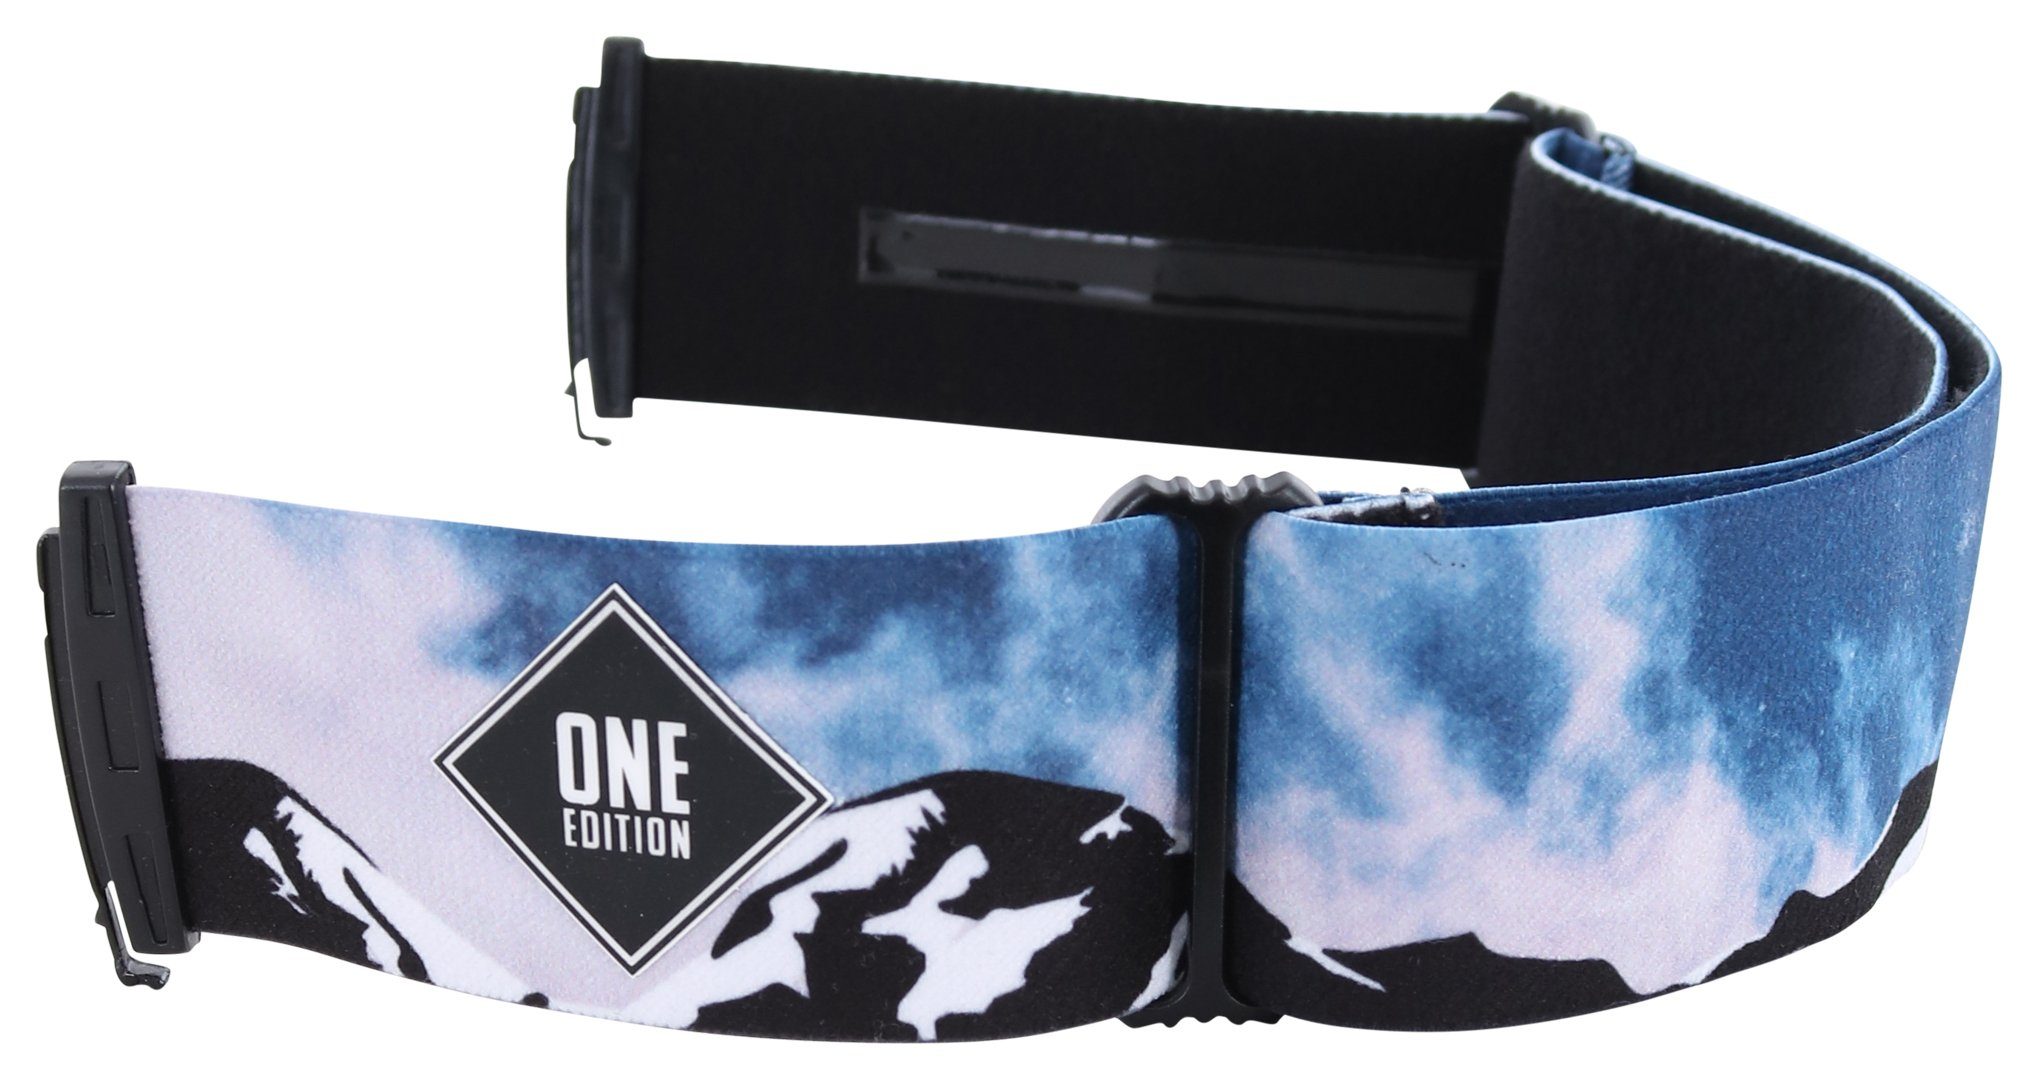 Magnet EDITION Glas ONE Schneebrille strap XPR mountain APHEX Aphex Snowboardbrille THE +